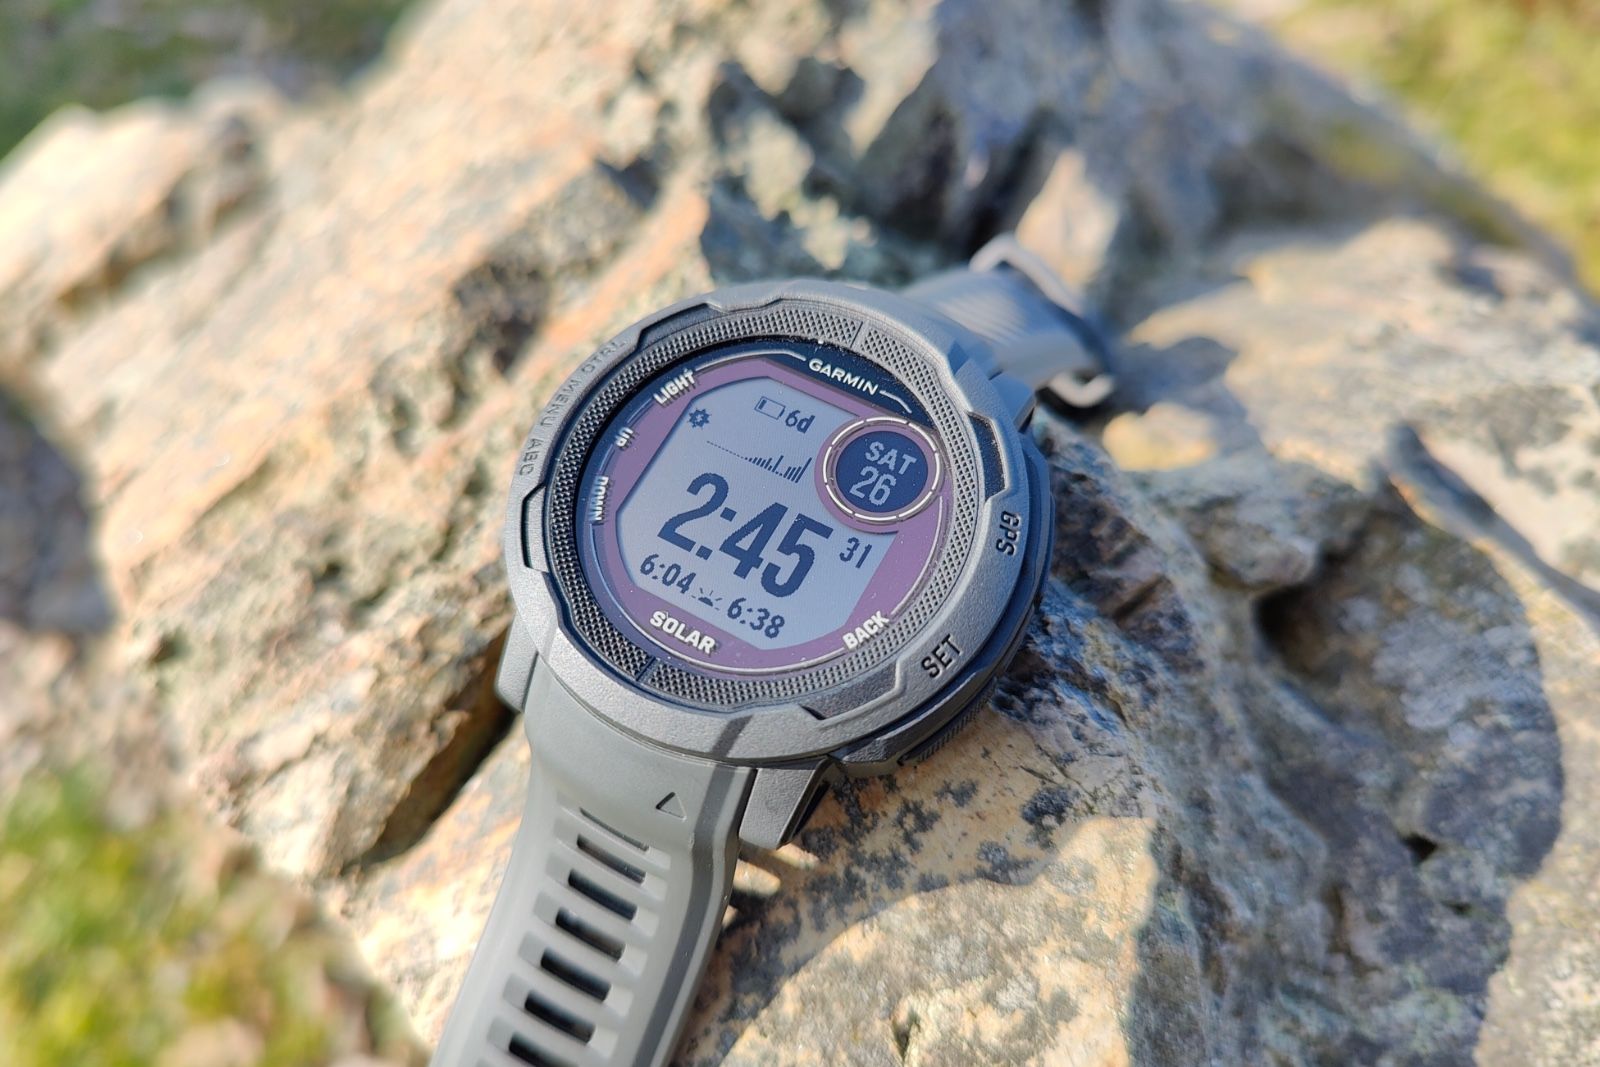 This Garmin watch has longest lasting battery we've tested, and is